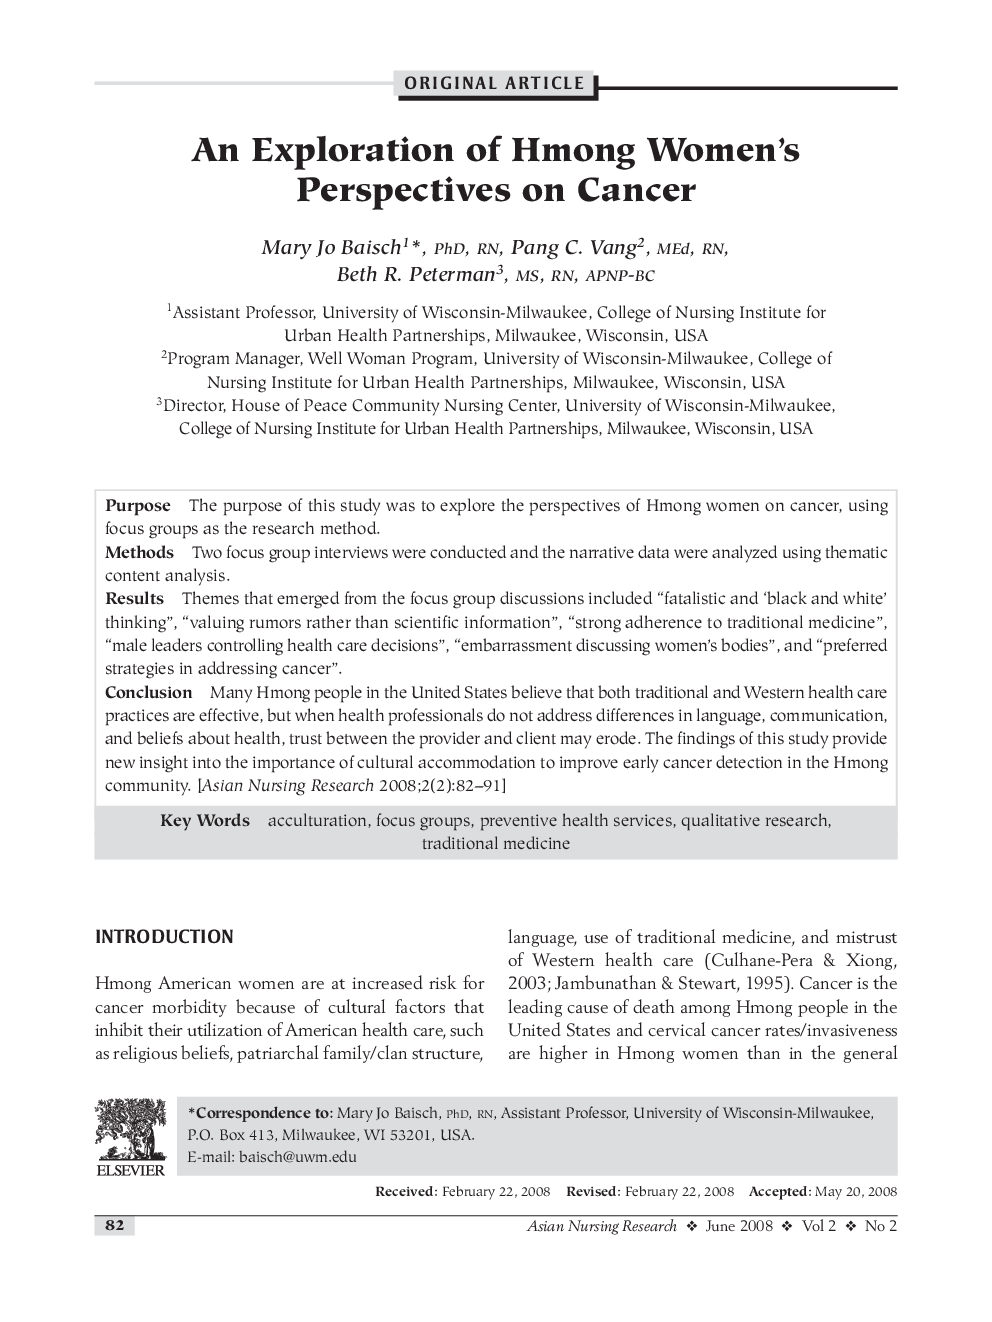 An Exploration of Hmong Women's Perspectives on Cancer